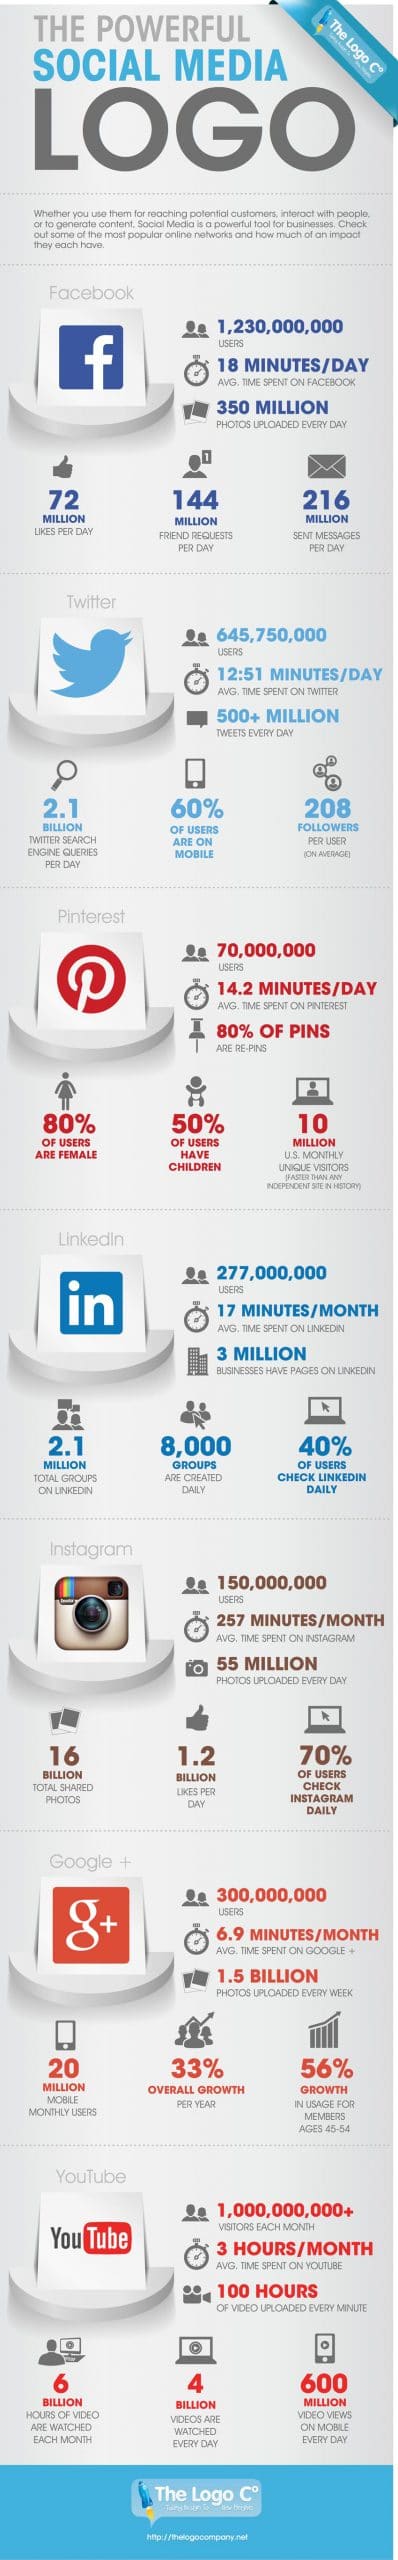 Infographic of the growth of social media. Is social media a waste of time or an opportunity